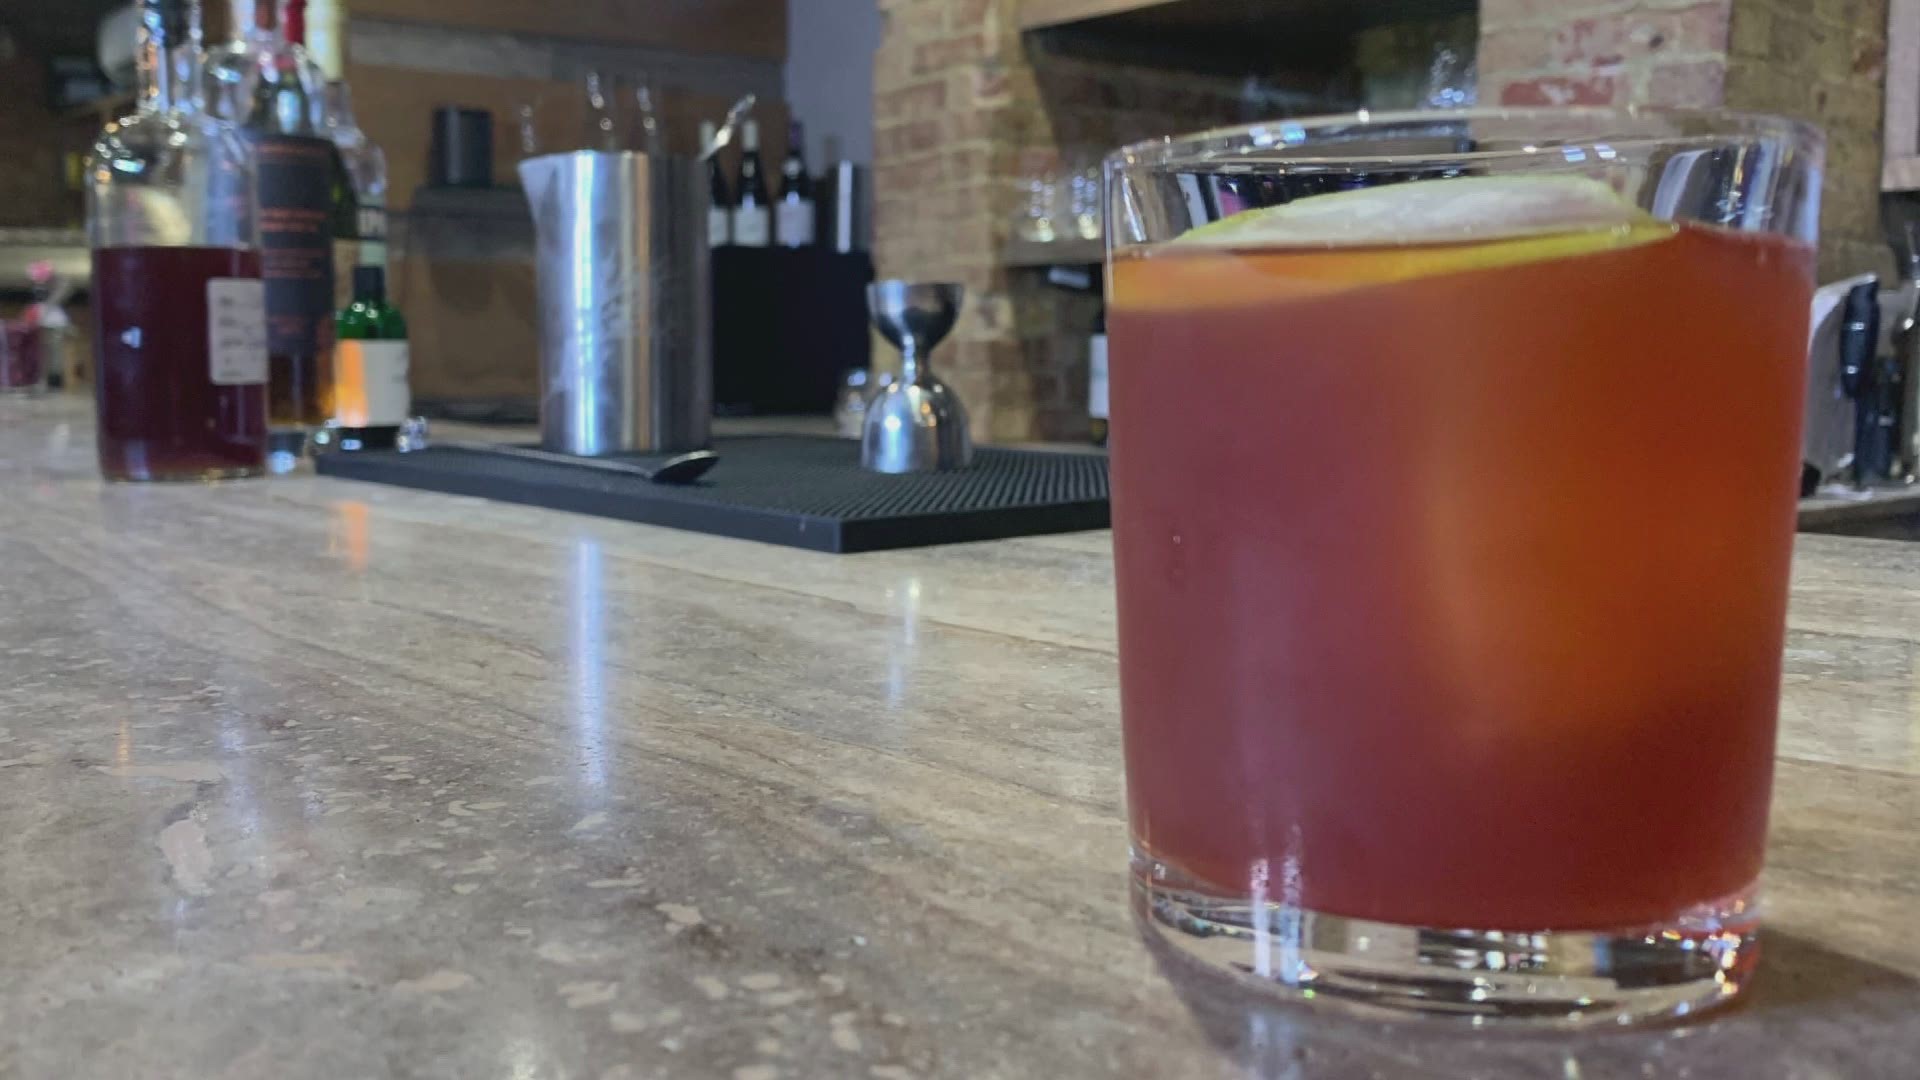 Staying home this holiday season? Novio's Bistro has some delicious cocktails you can make in your kitchen.